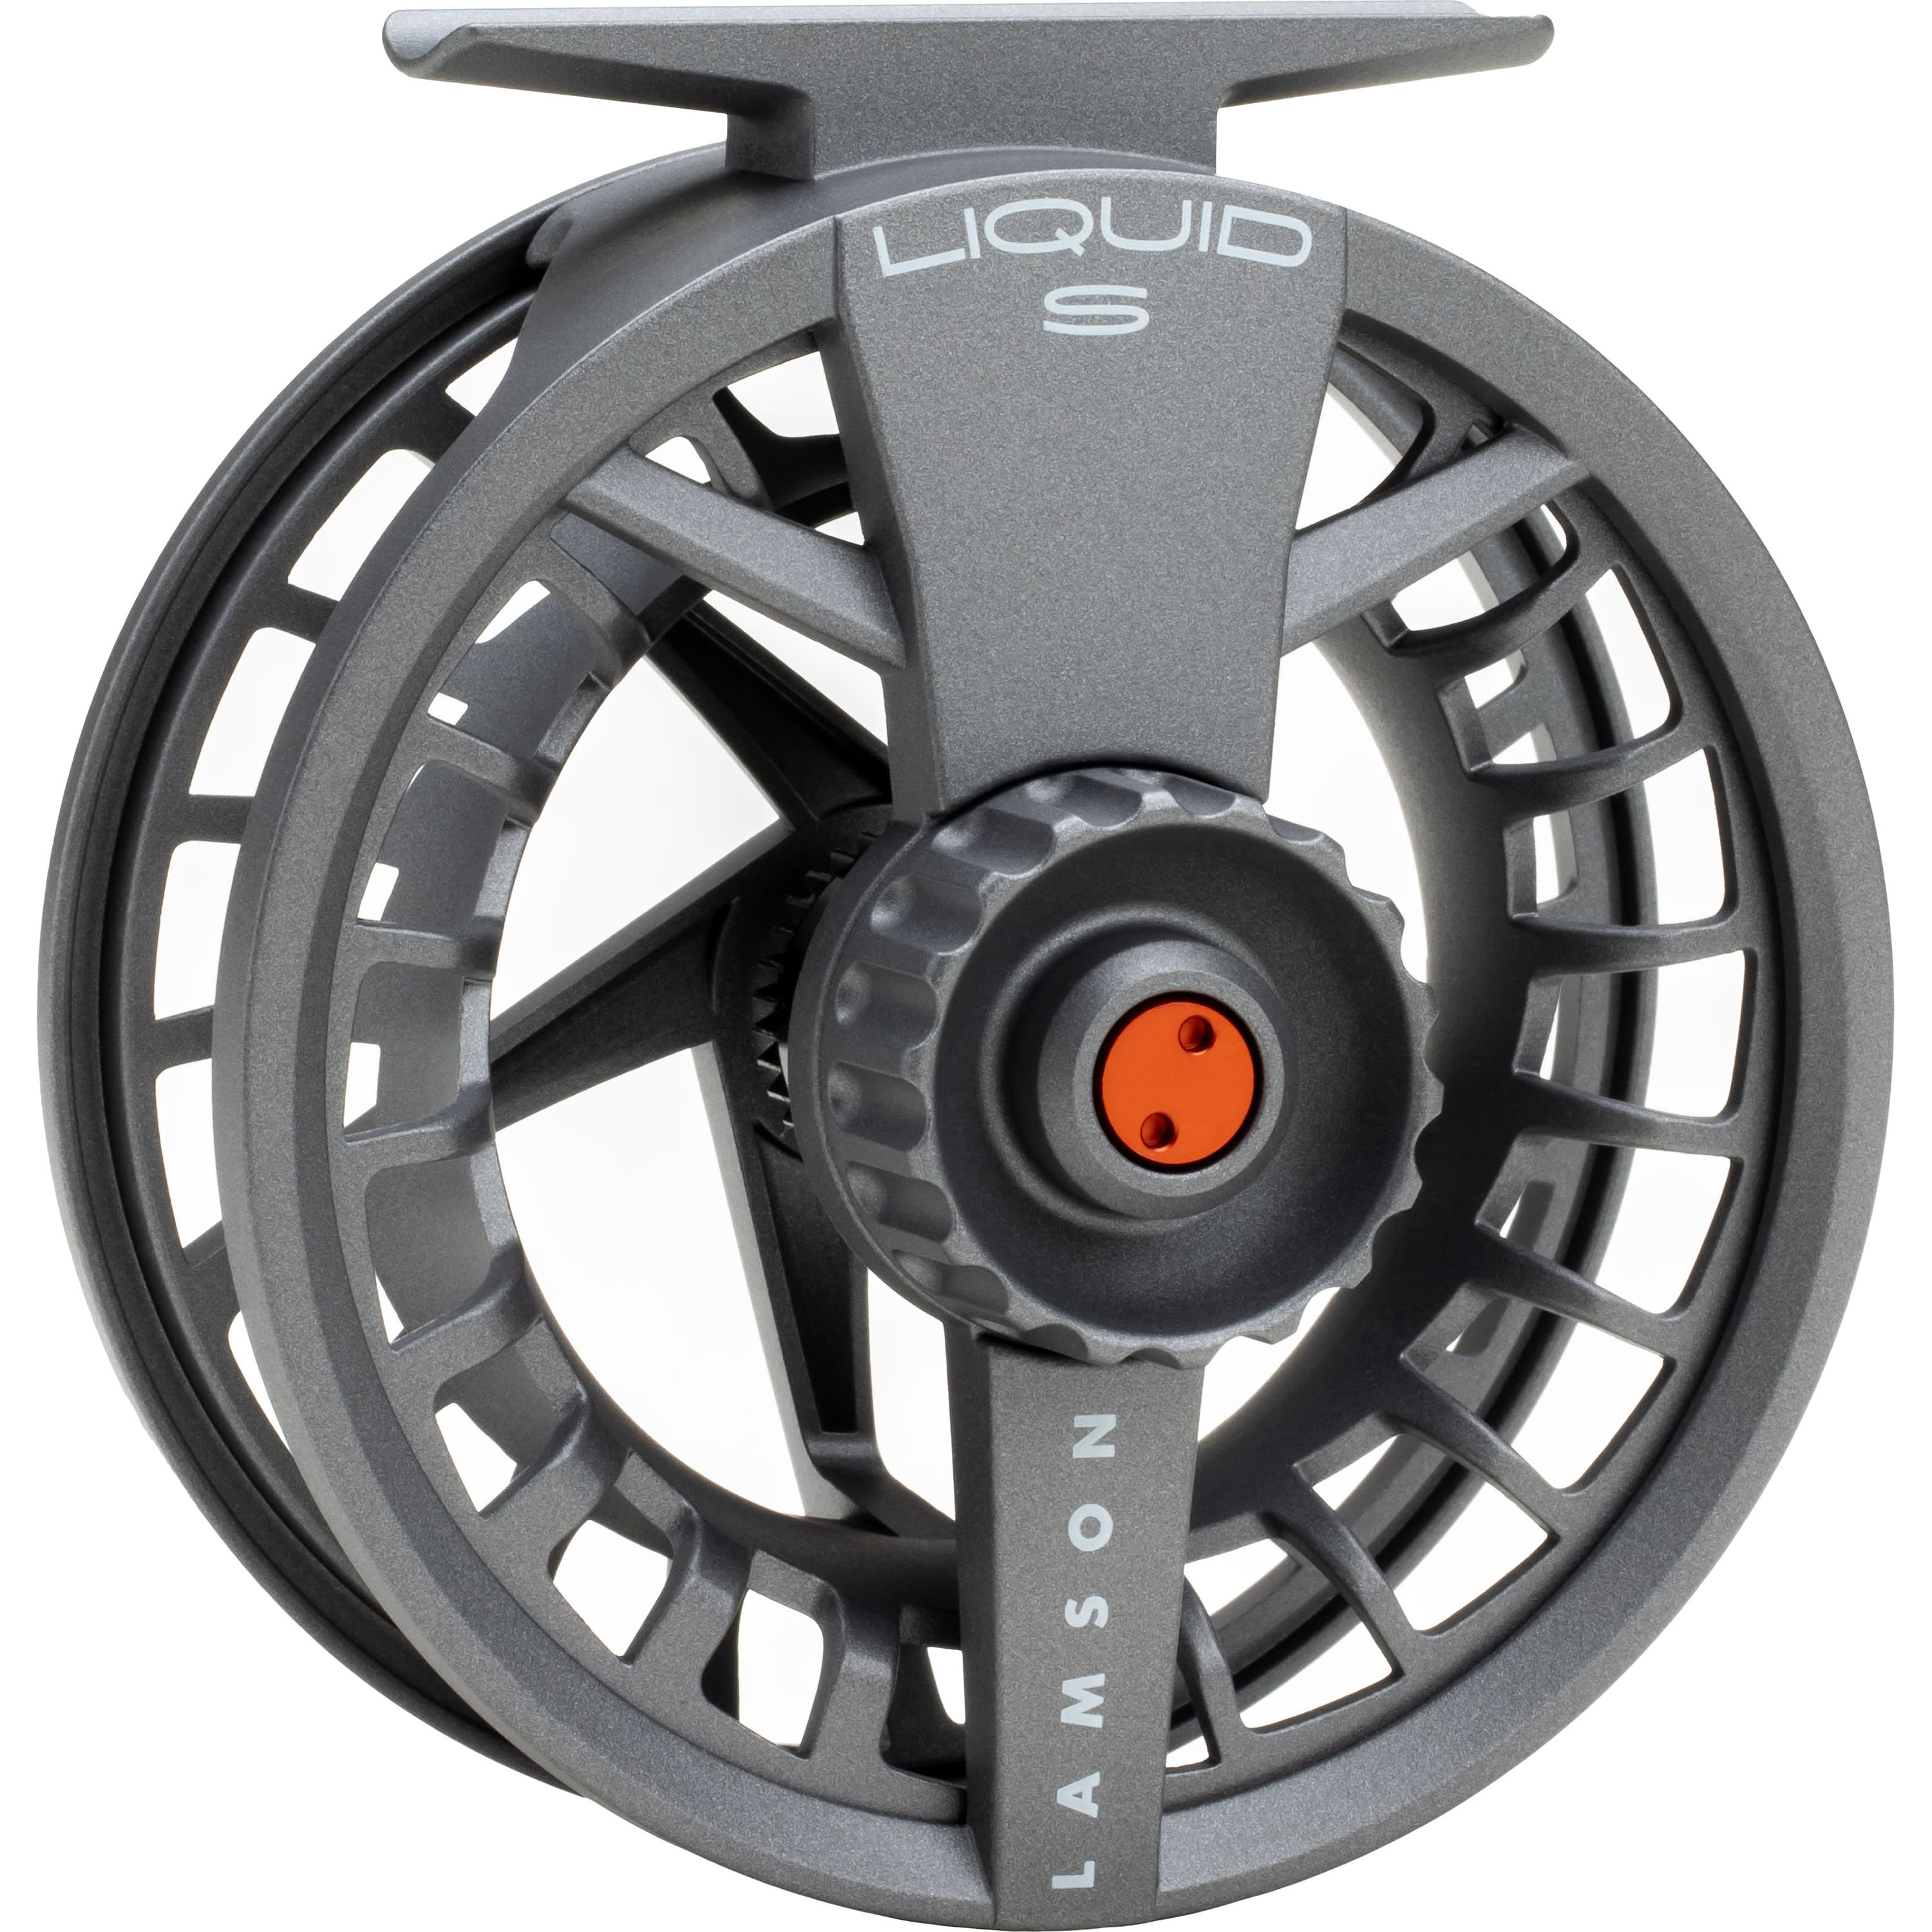 Orvis Replacement Spool-Black Nickel for Classic Battenkill Fly Reel